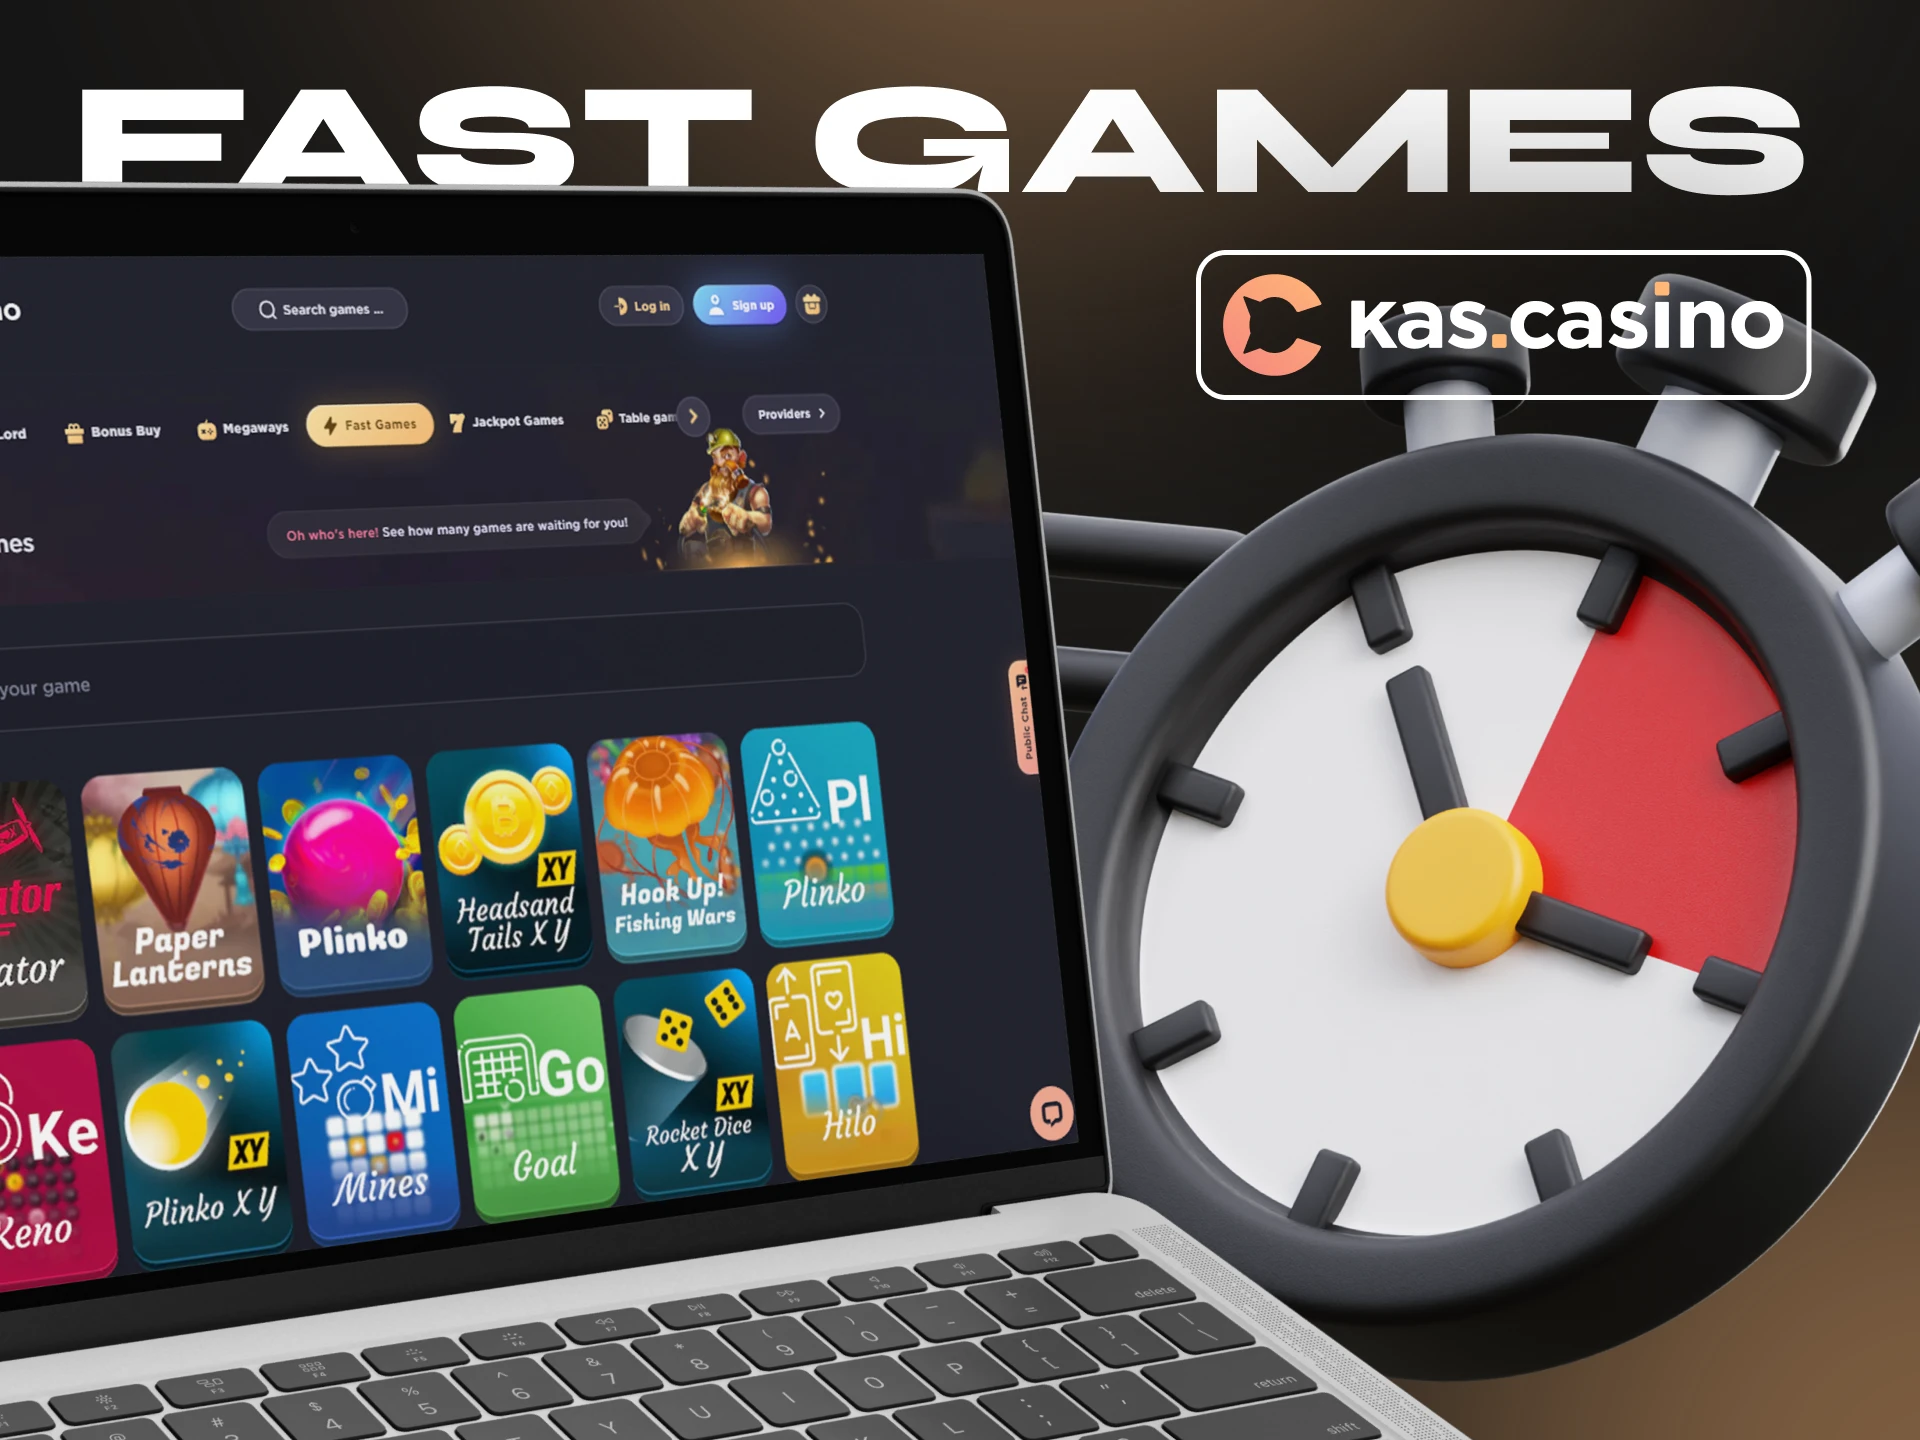 Try fast games at Kas Casino.